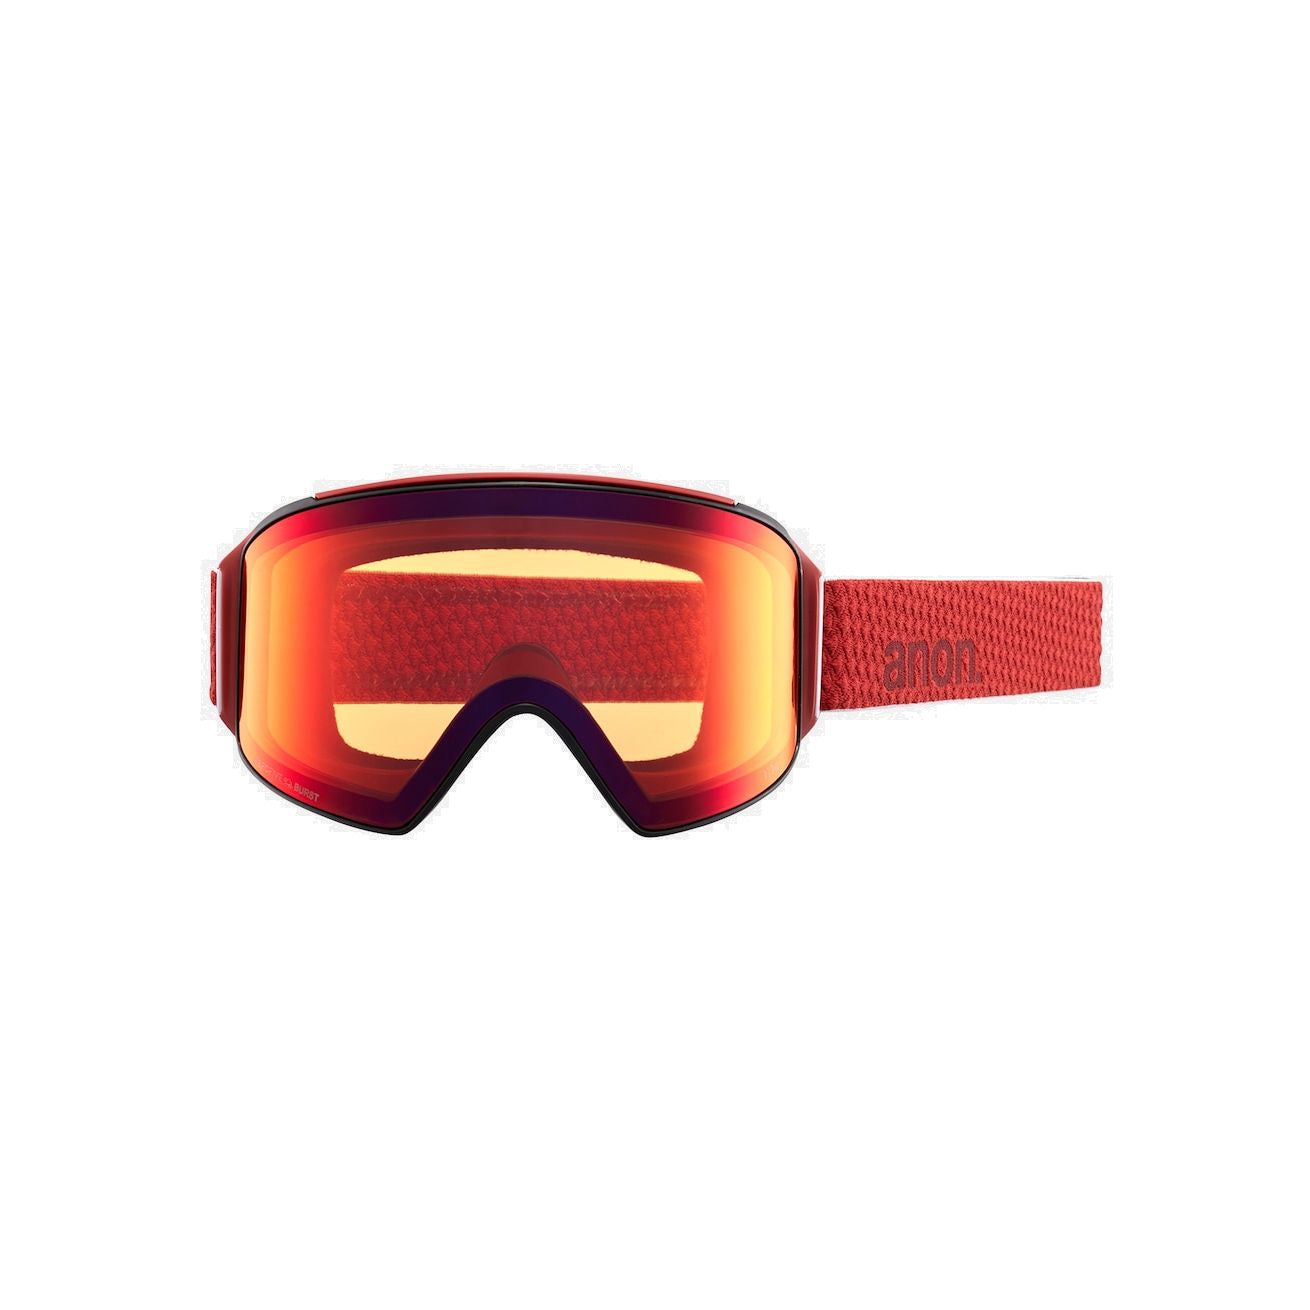 Anon M4 Cylindrical Goggles + Bonus Lens + MFI Face Mask - Low Bridge Fit Mars / Perceive Sunny Red Snow Goggles